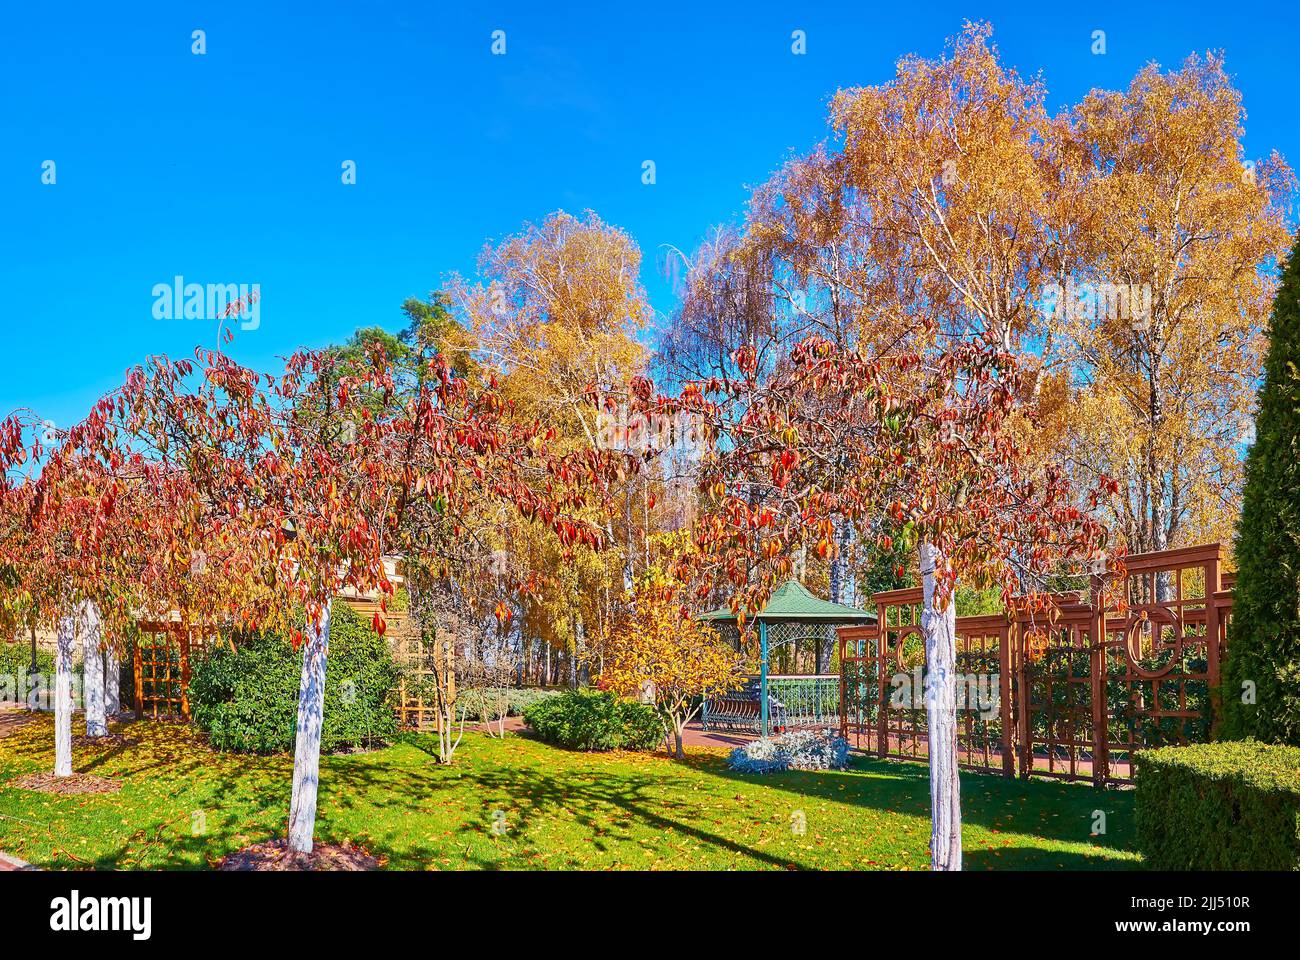 The line of bright red trees with whitewashed trunks in a beautiful autumn park, Mezhyhirya, Ukraine Stock Photo